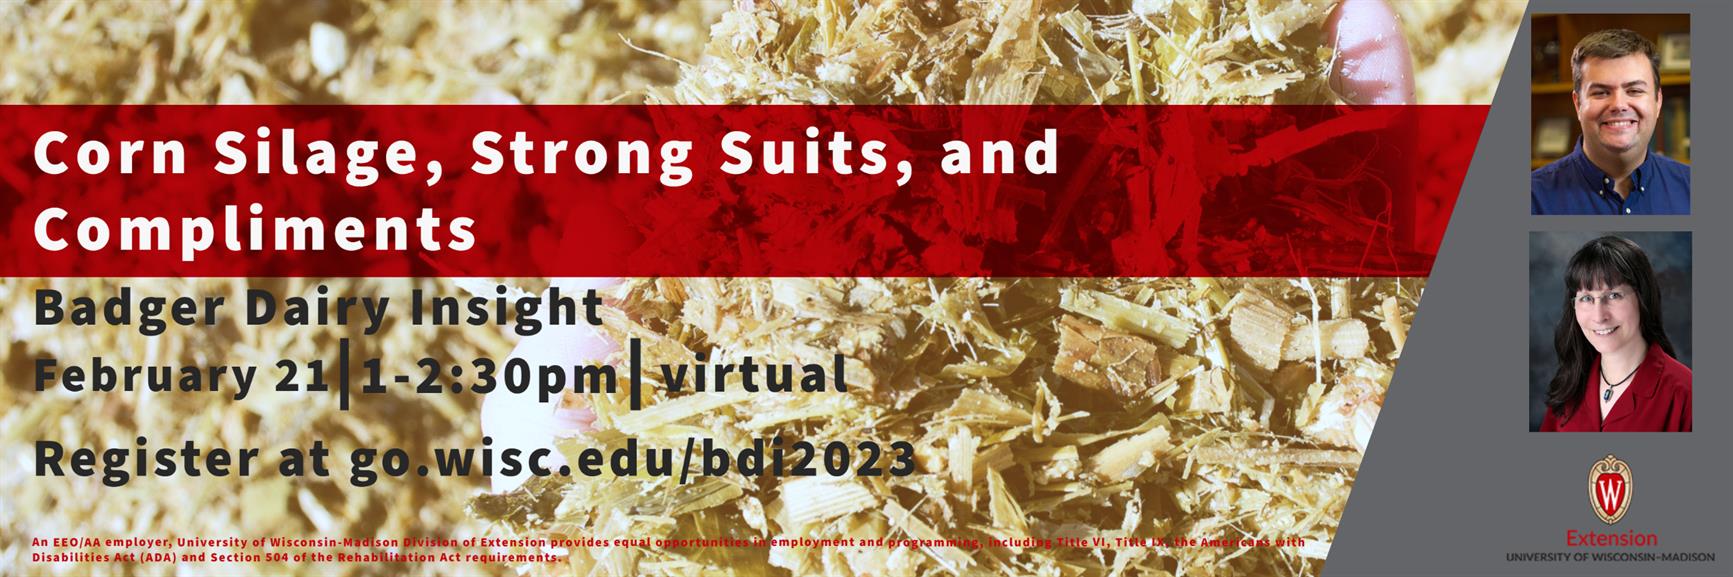 Corn Silage, Strong Suits, and Compliments